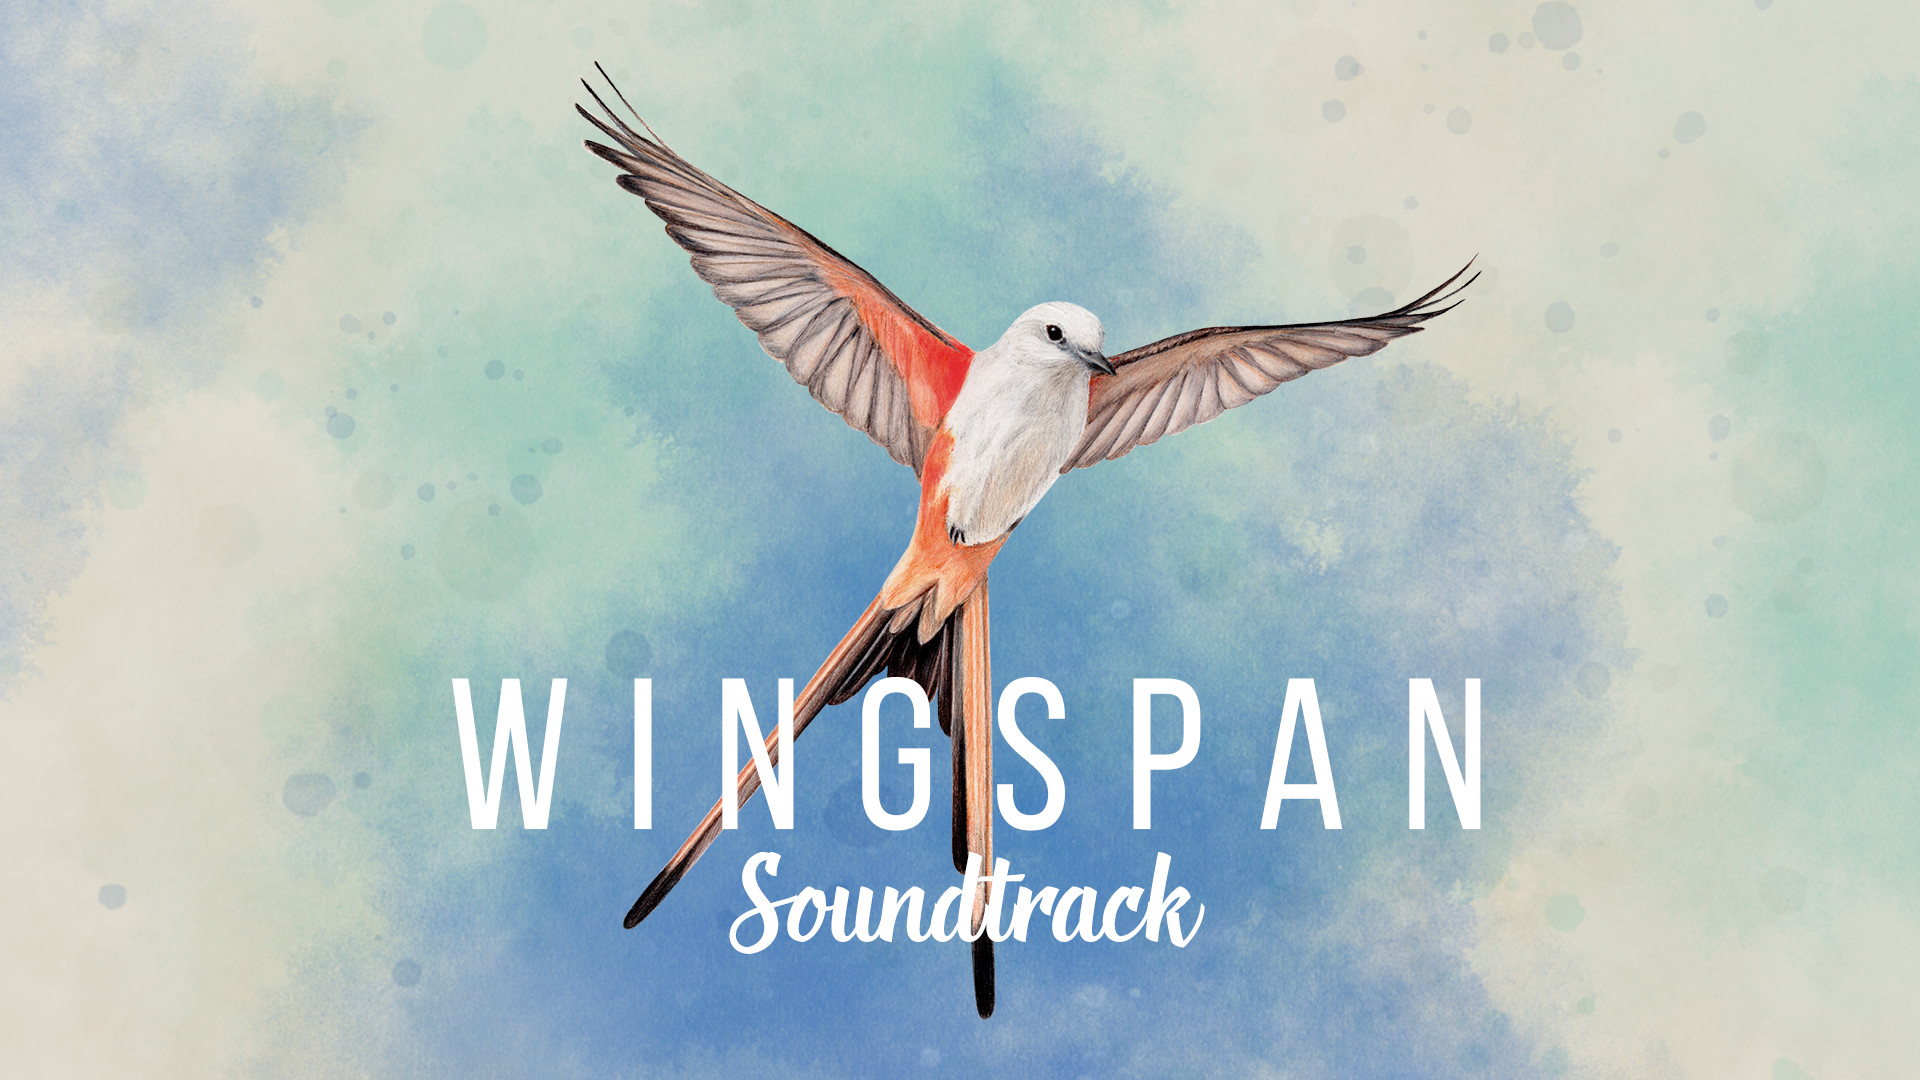 Save 70% on Wingspan Soundtrack on Steam